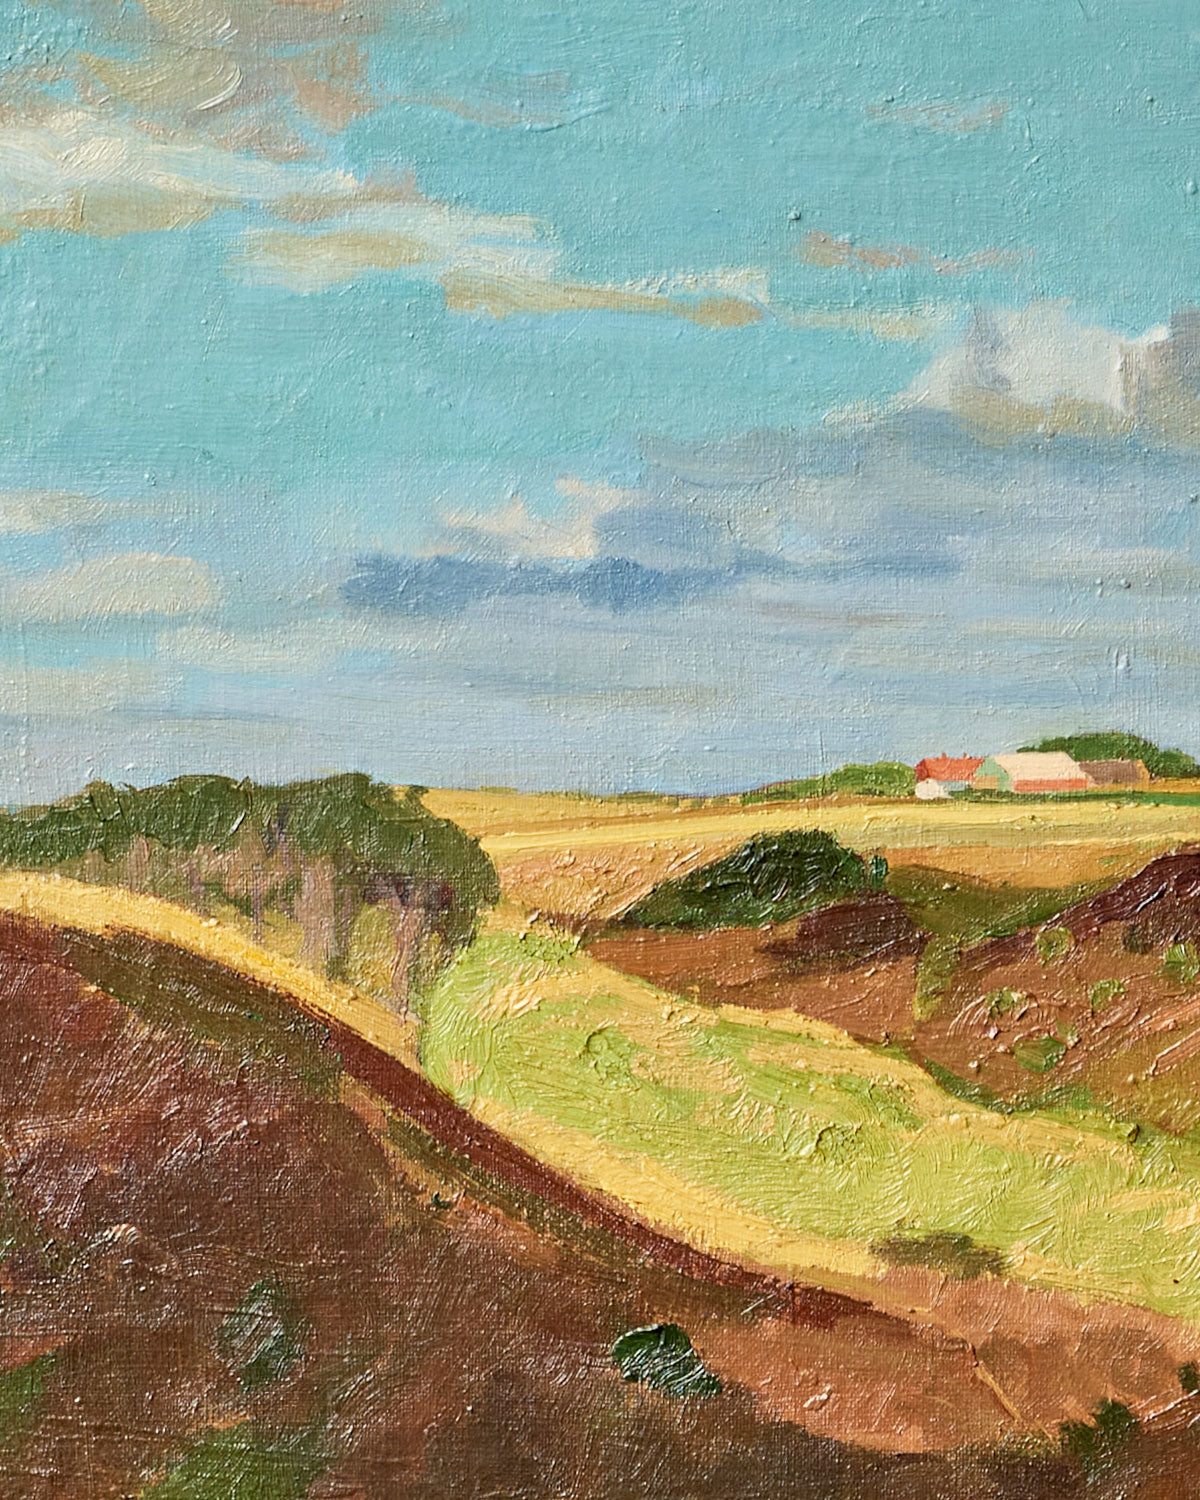 Landscape from Boddum, 1945